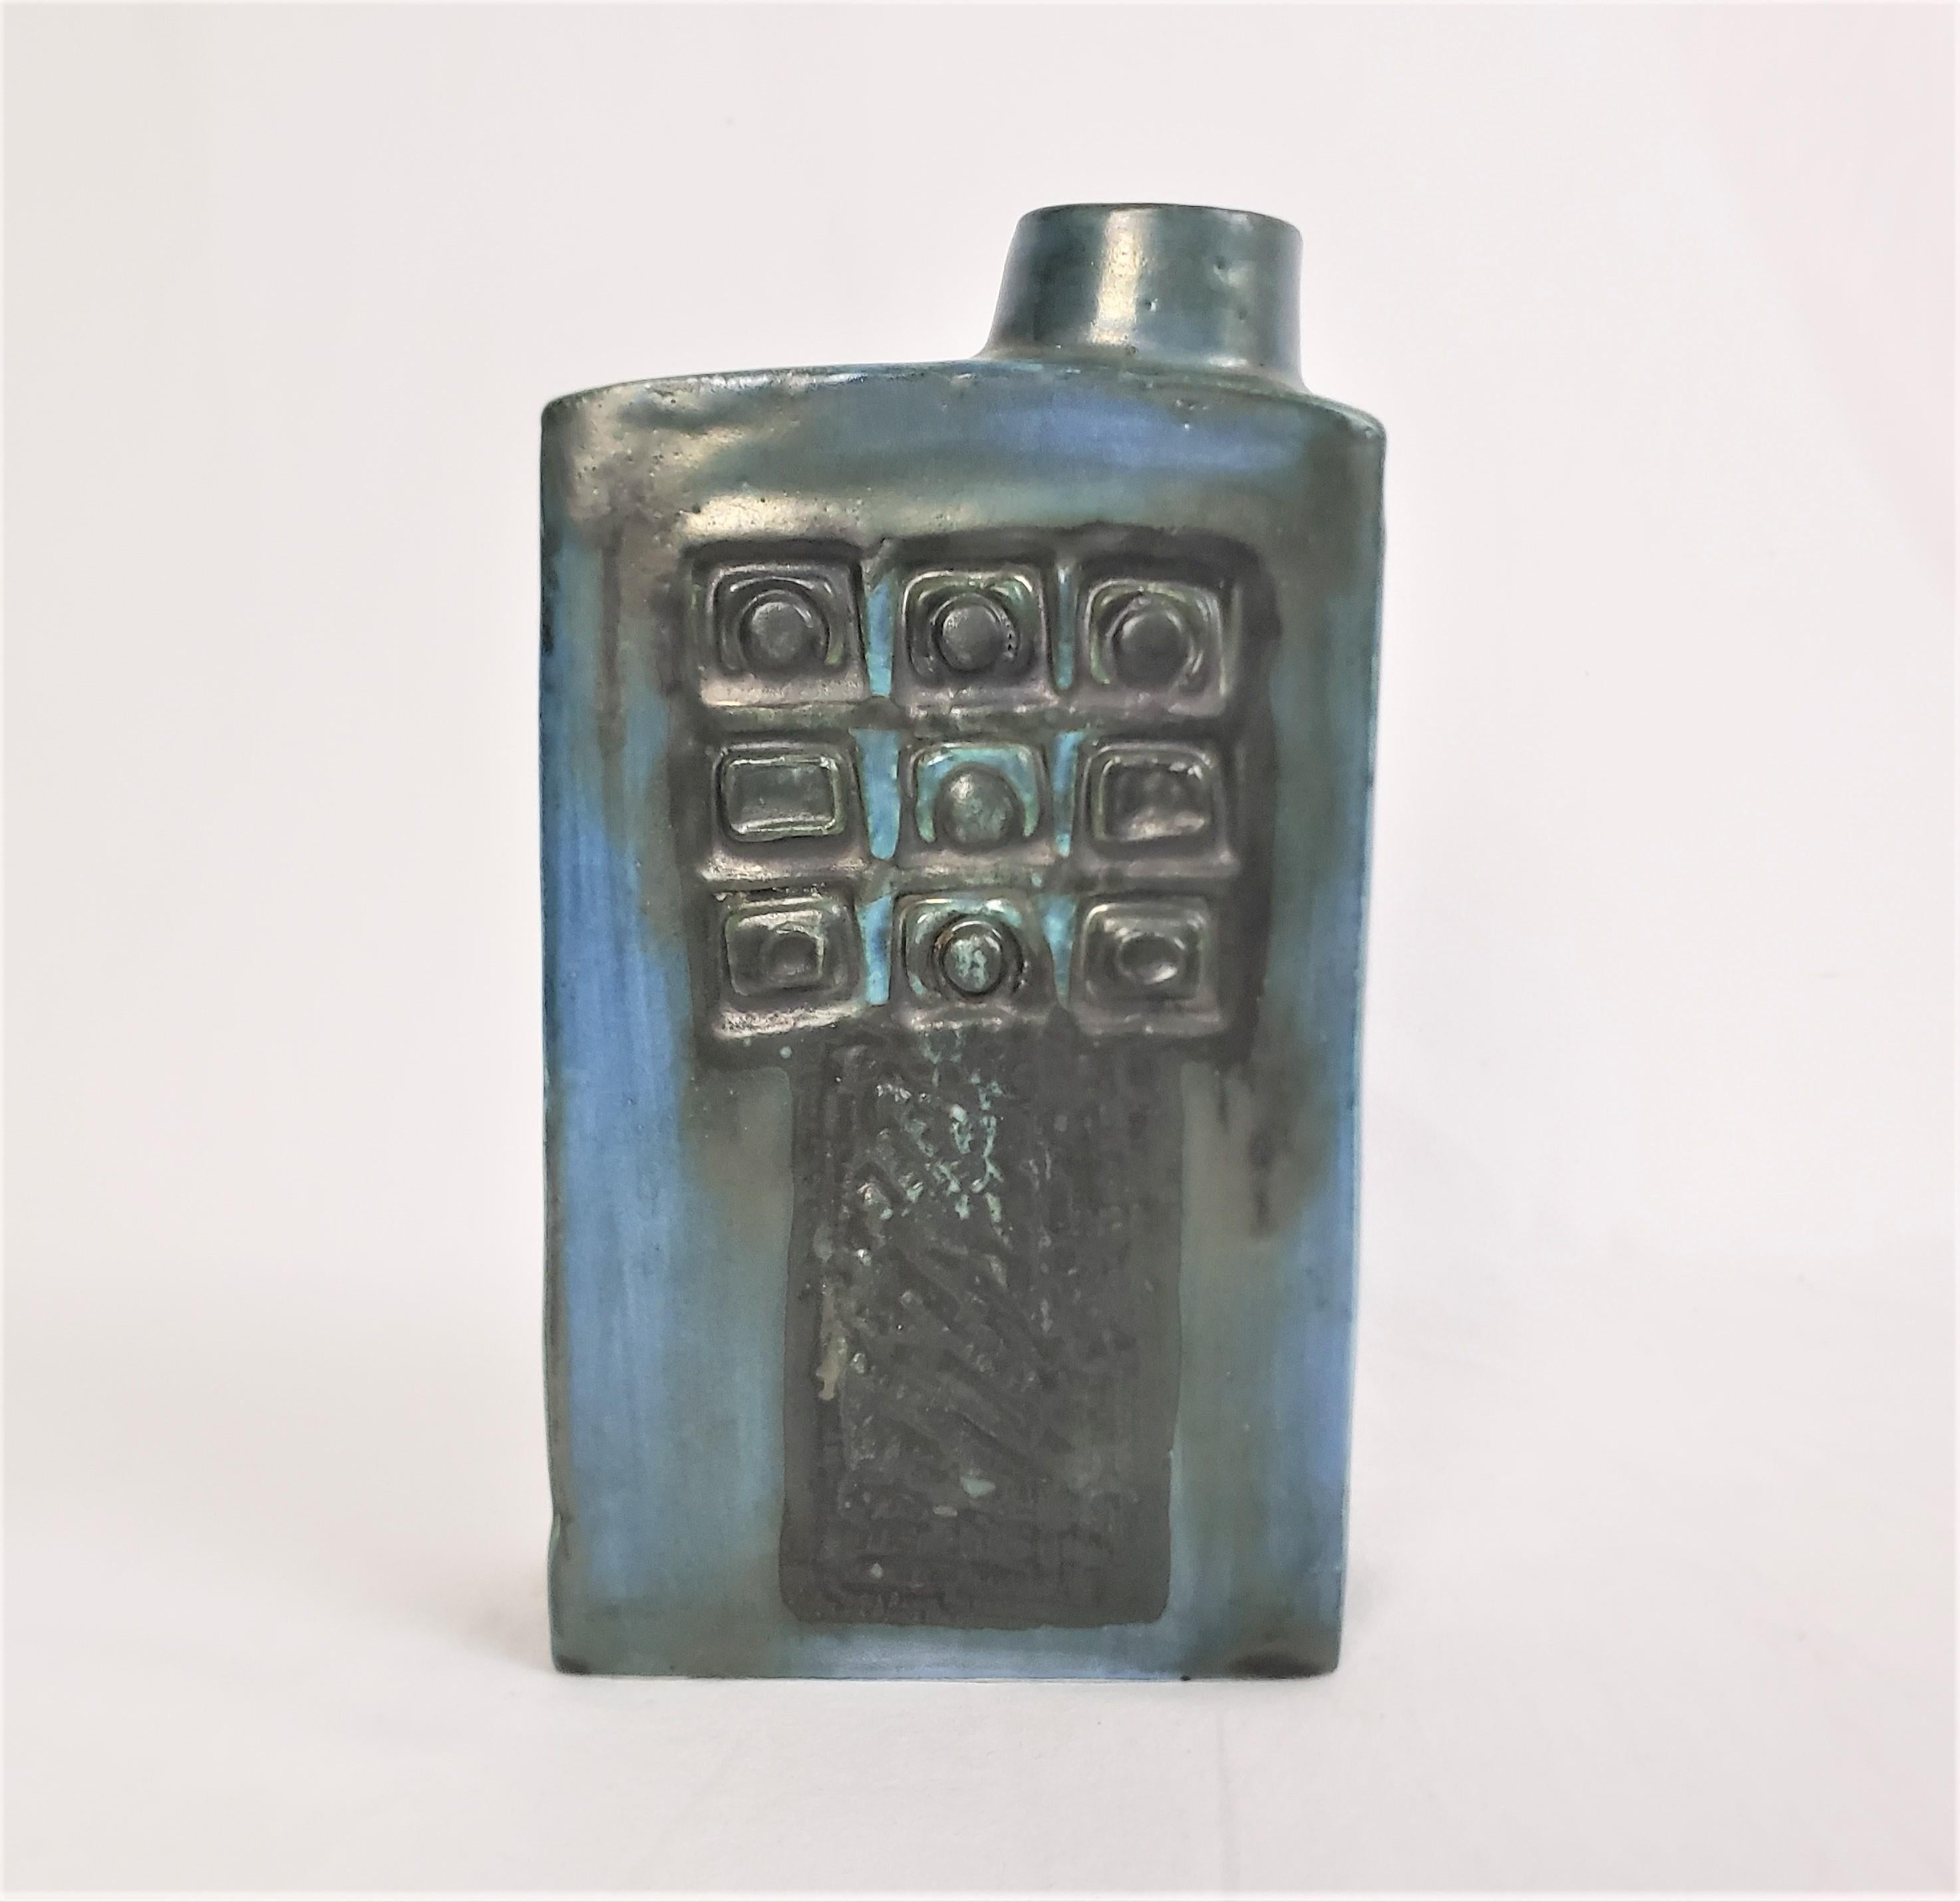 This vase was done by the well known Troika St. Ives factory of England in approximately 1960 in the period Mid-Century Modern style. This art pottery vase is done with a deep blue ground, with slip over glazes of green and black. Both the front and